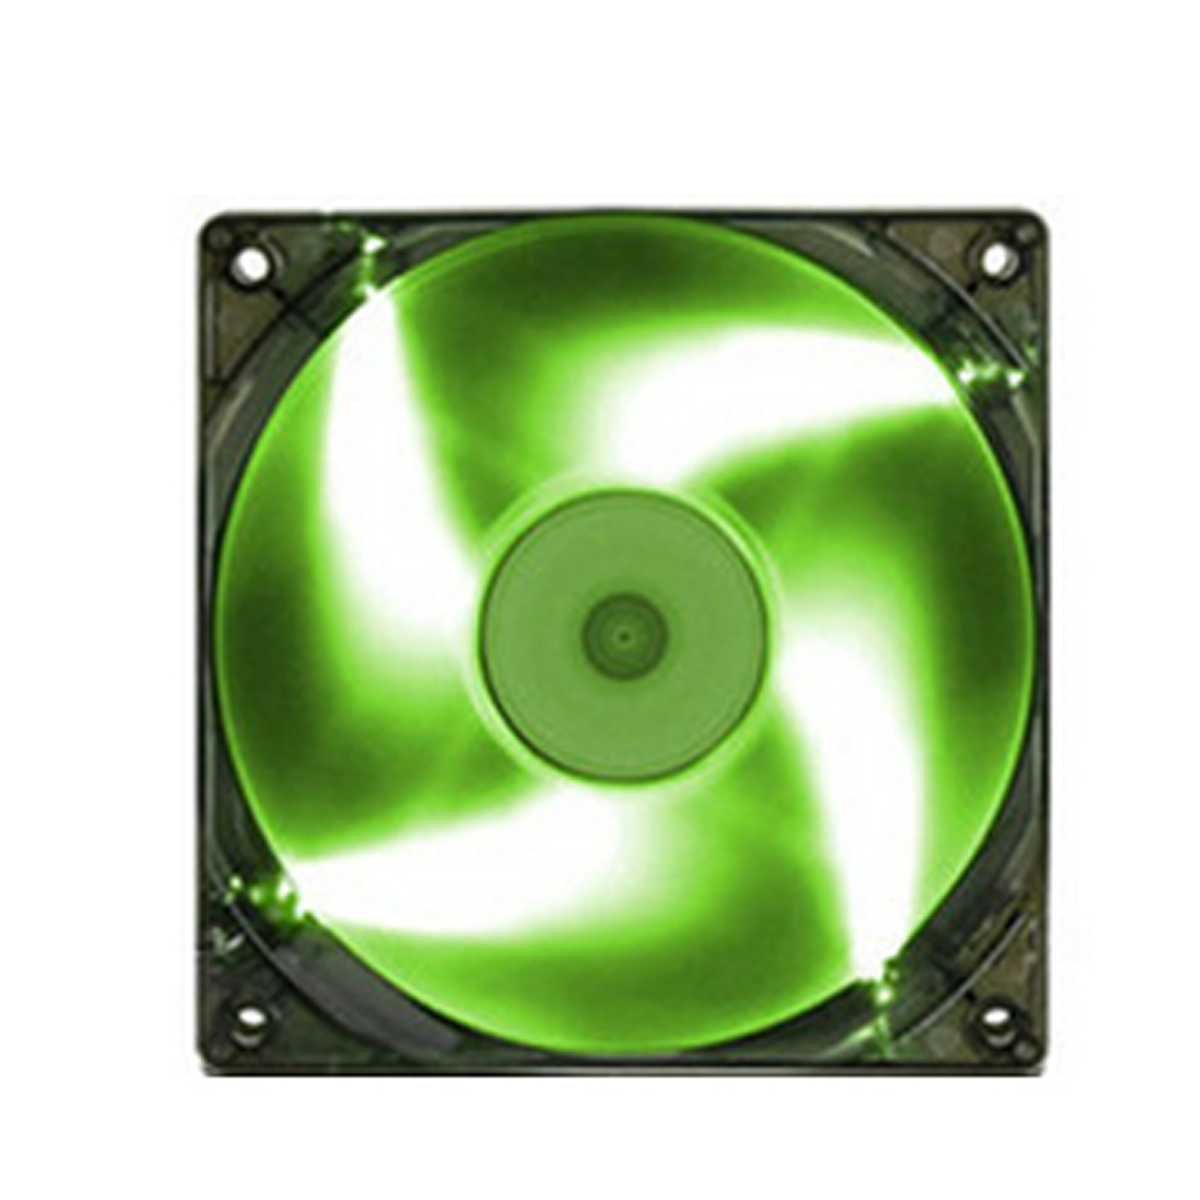 2pcs-Green-120x120x25mm-Mining-Miner-LED-Cooling-Fan-40cm-Cable-For-ETH-BTC-Ethereum-1694938